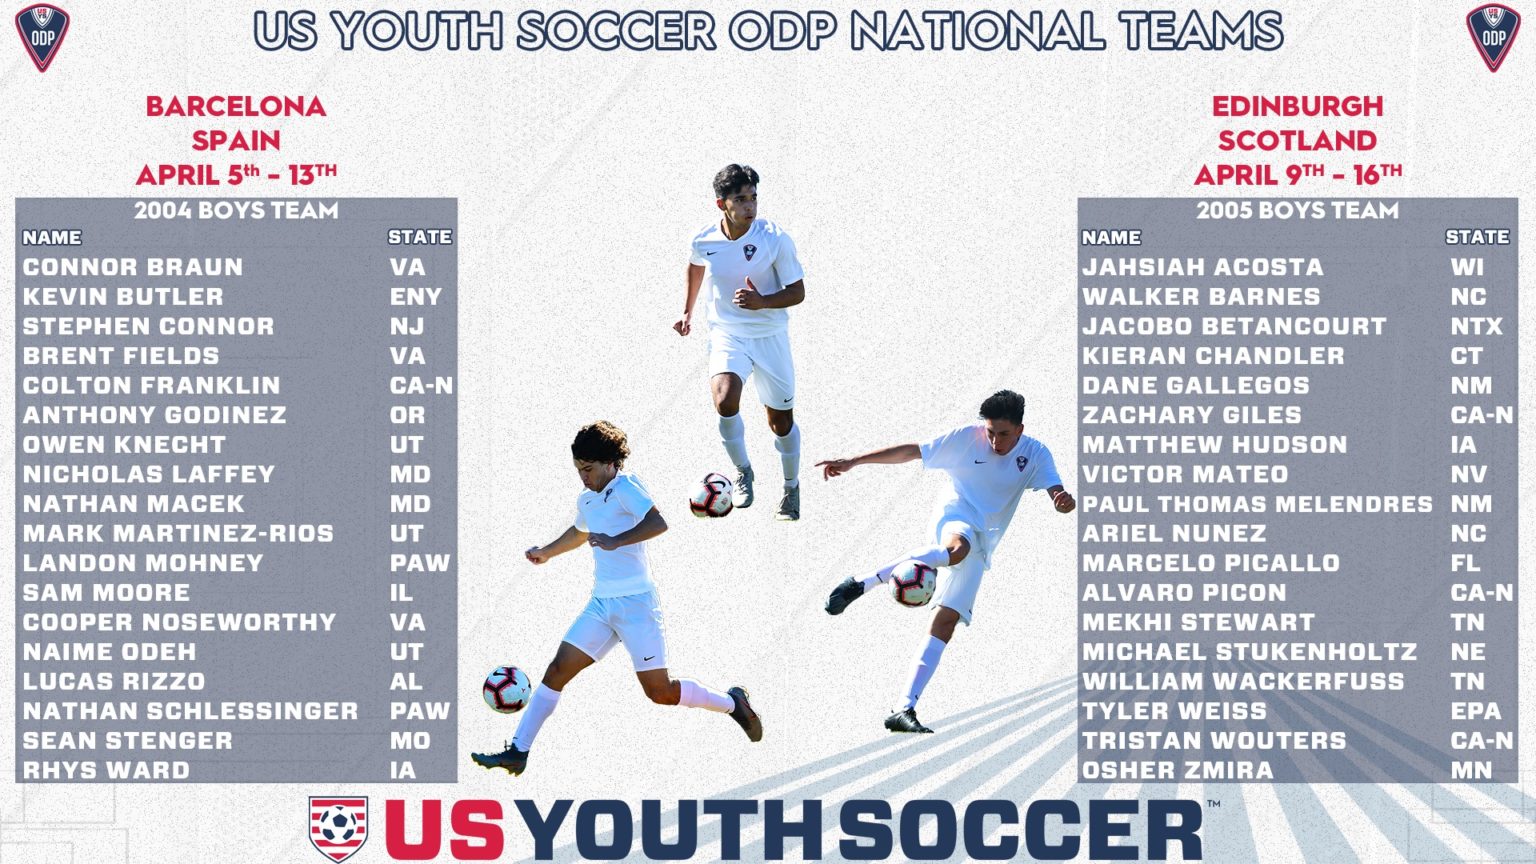 US Youth Soccer ODP National Team rosters revealed for April events